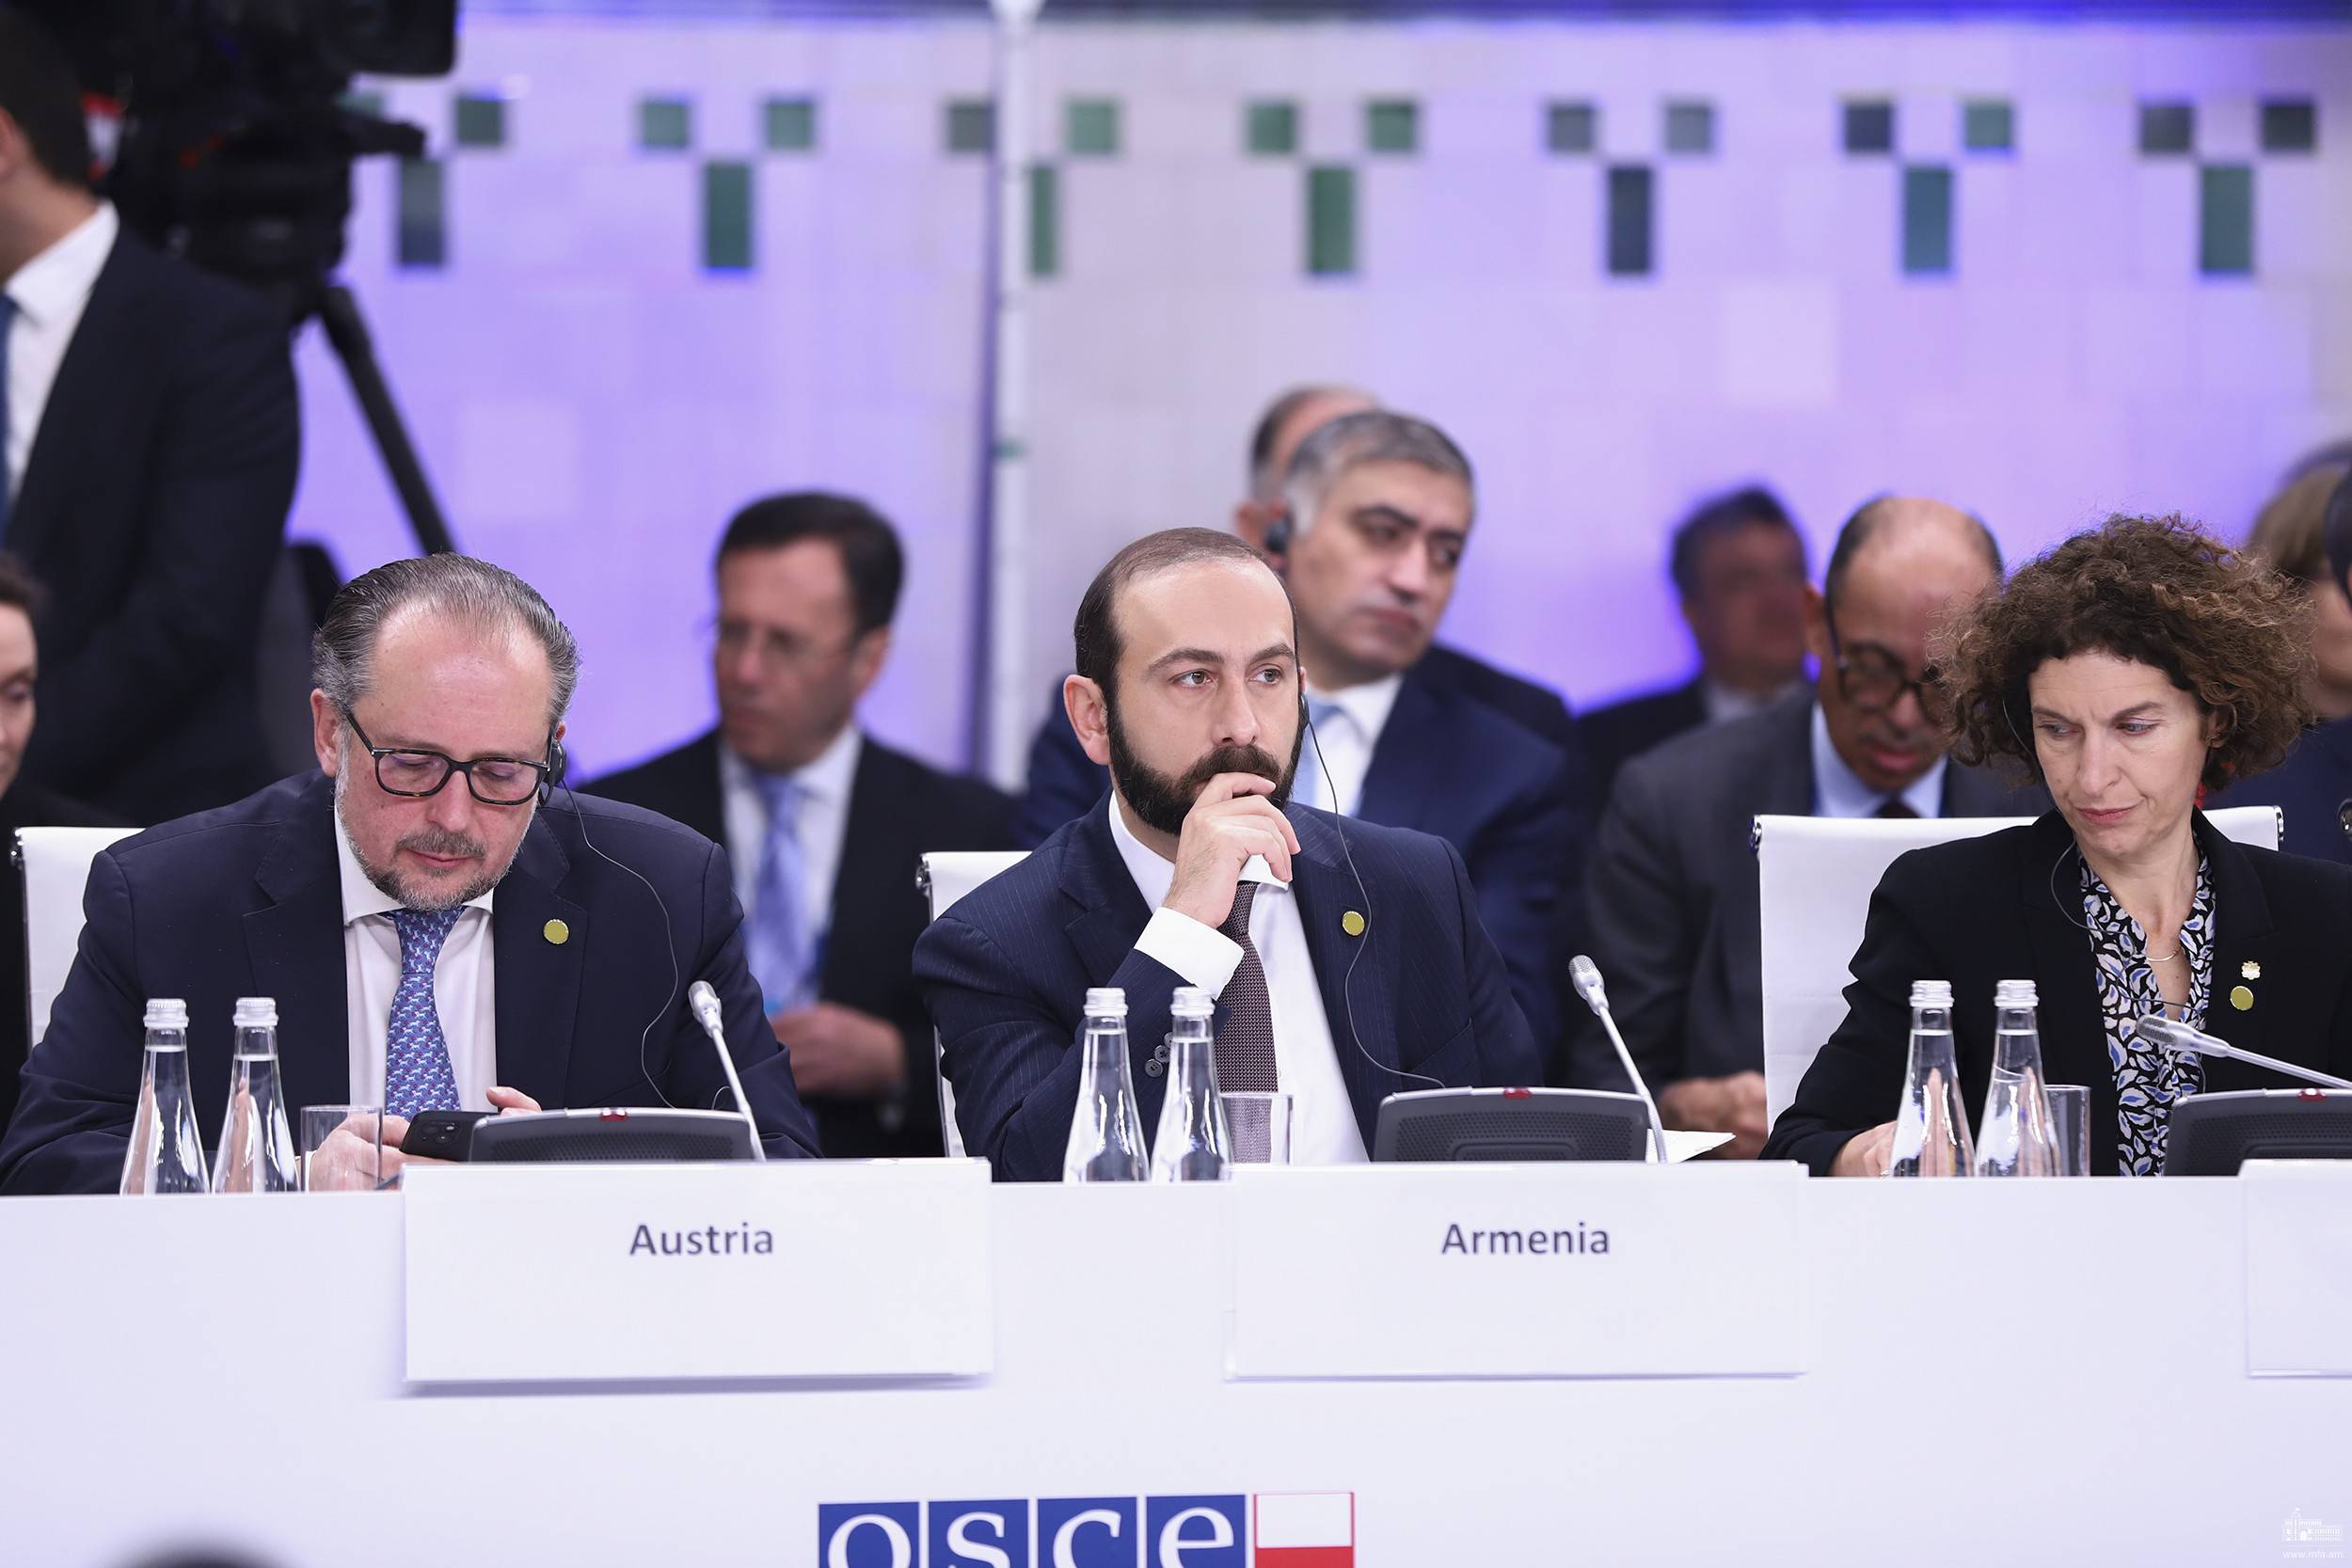 Mirzoyan reiterates commitment to peace, says Armenia will mend ties with Hungary